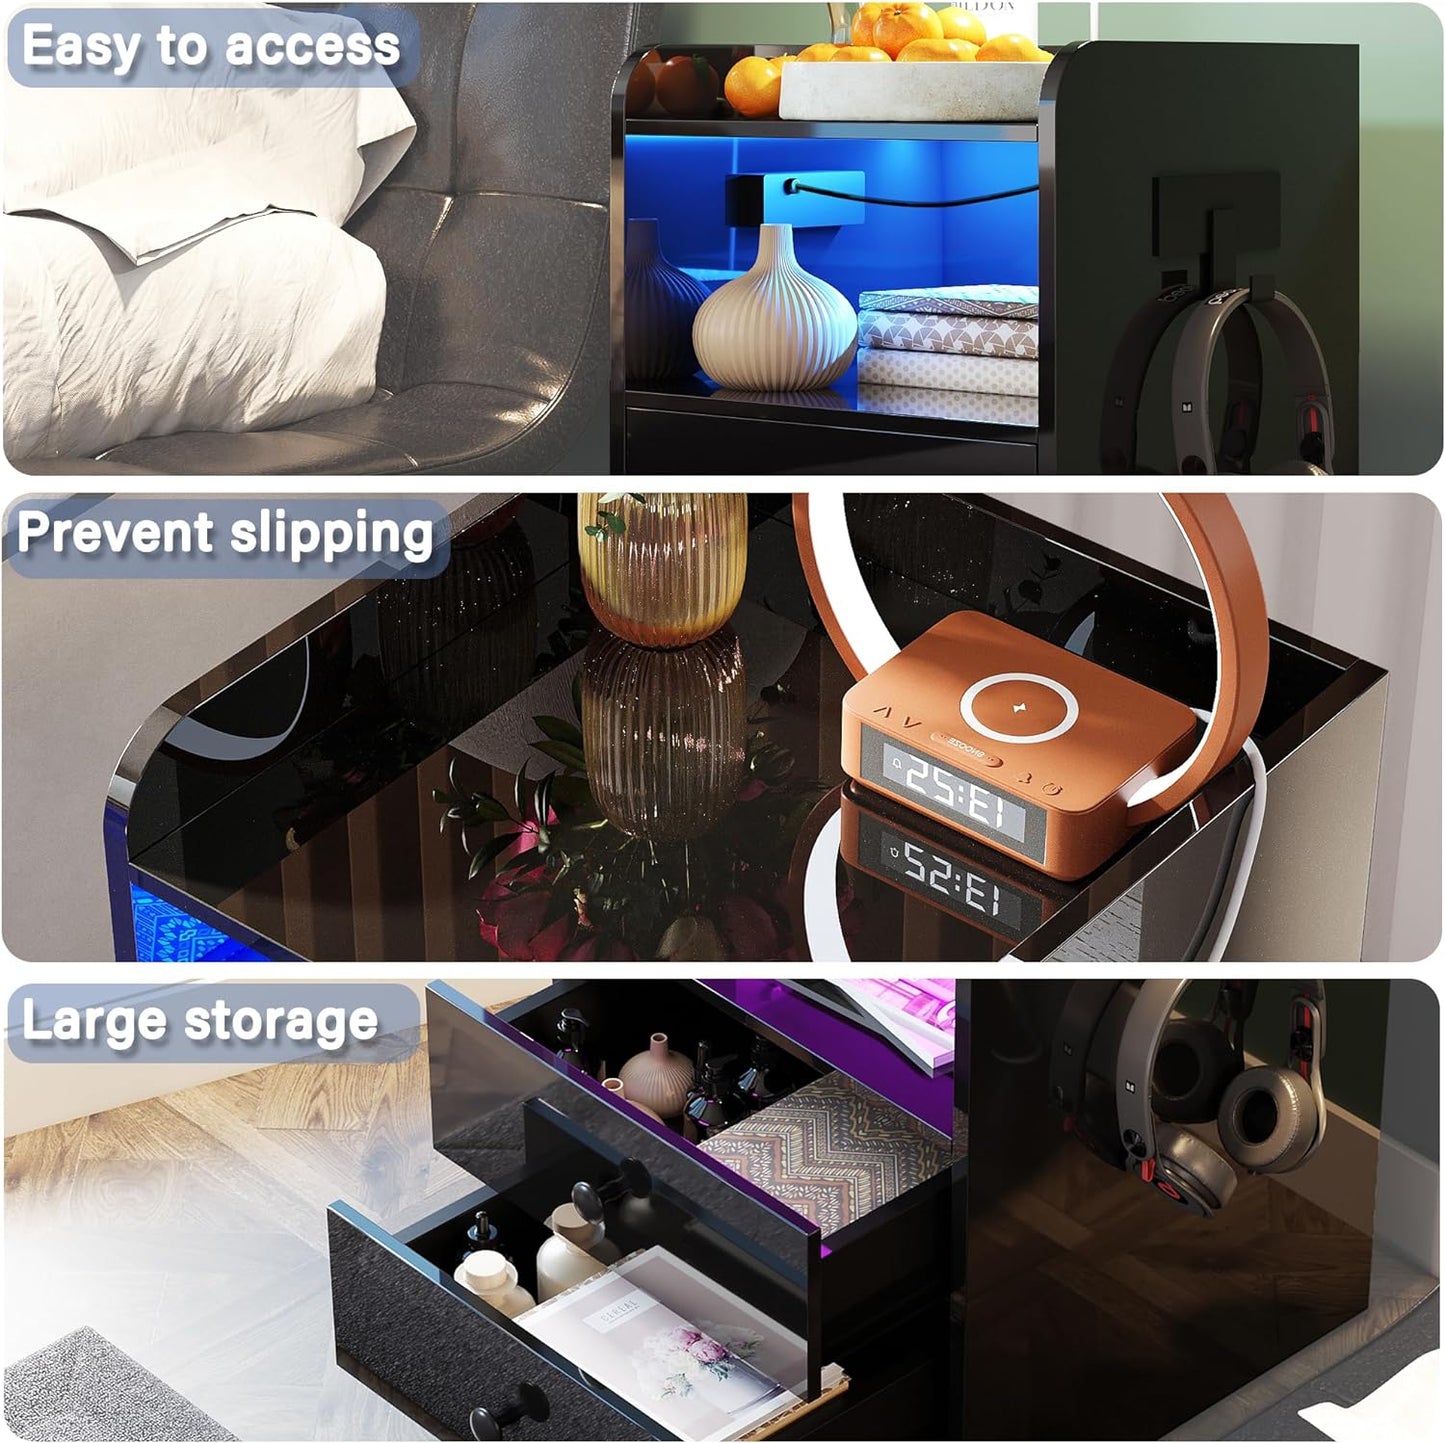 Black Nightstand with LED Light